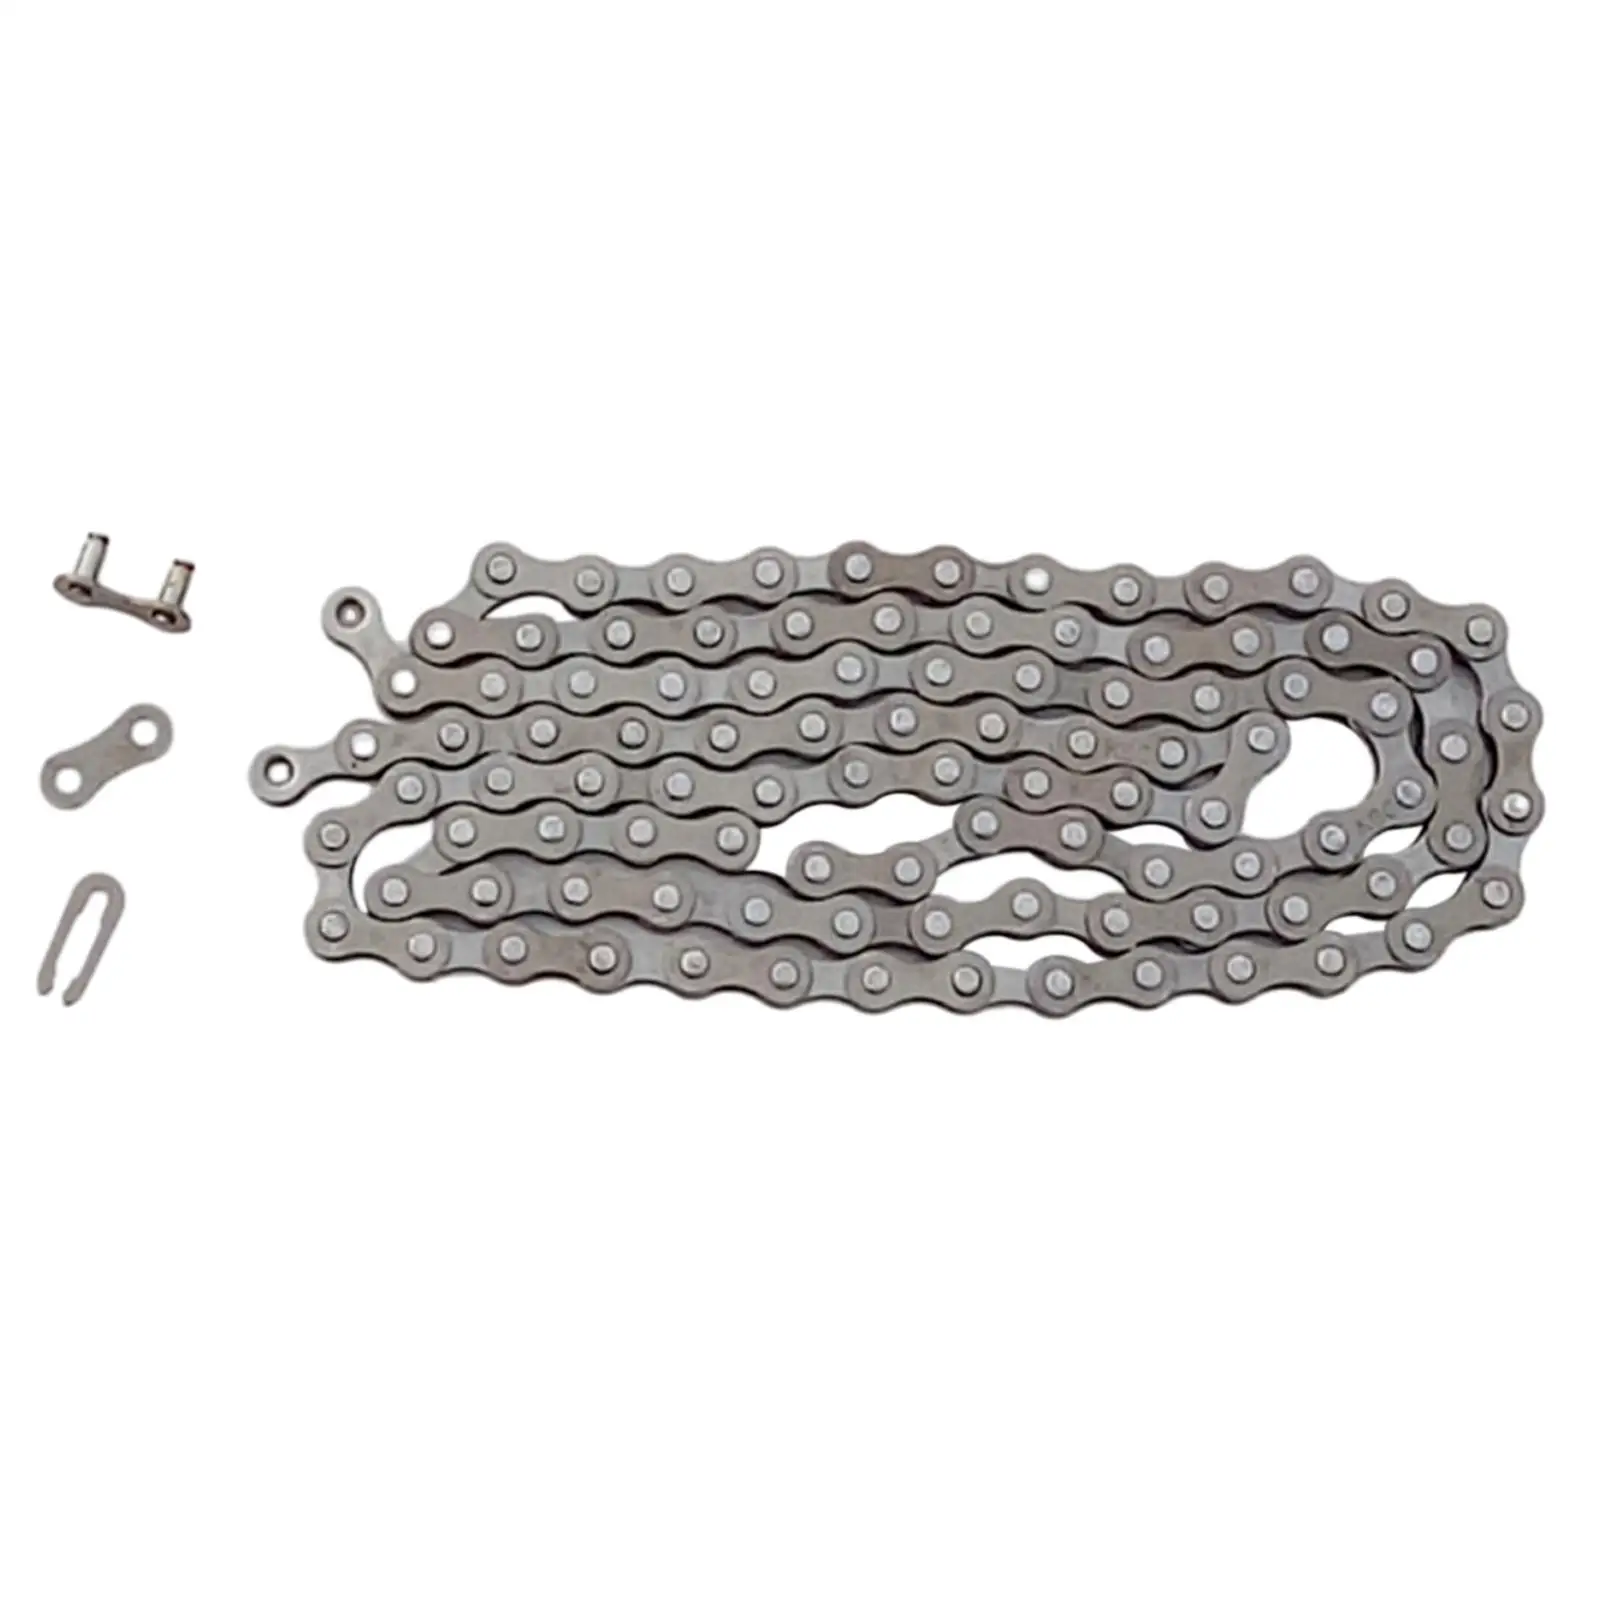 114 Pieces Bicycle Links Chain Joint Connector Replacement Parts Missing Link for 6-7-8 9 10 11 Part MTB Road